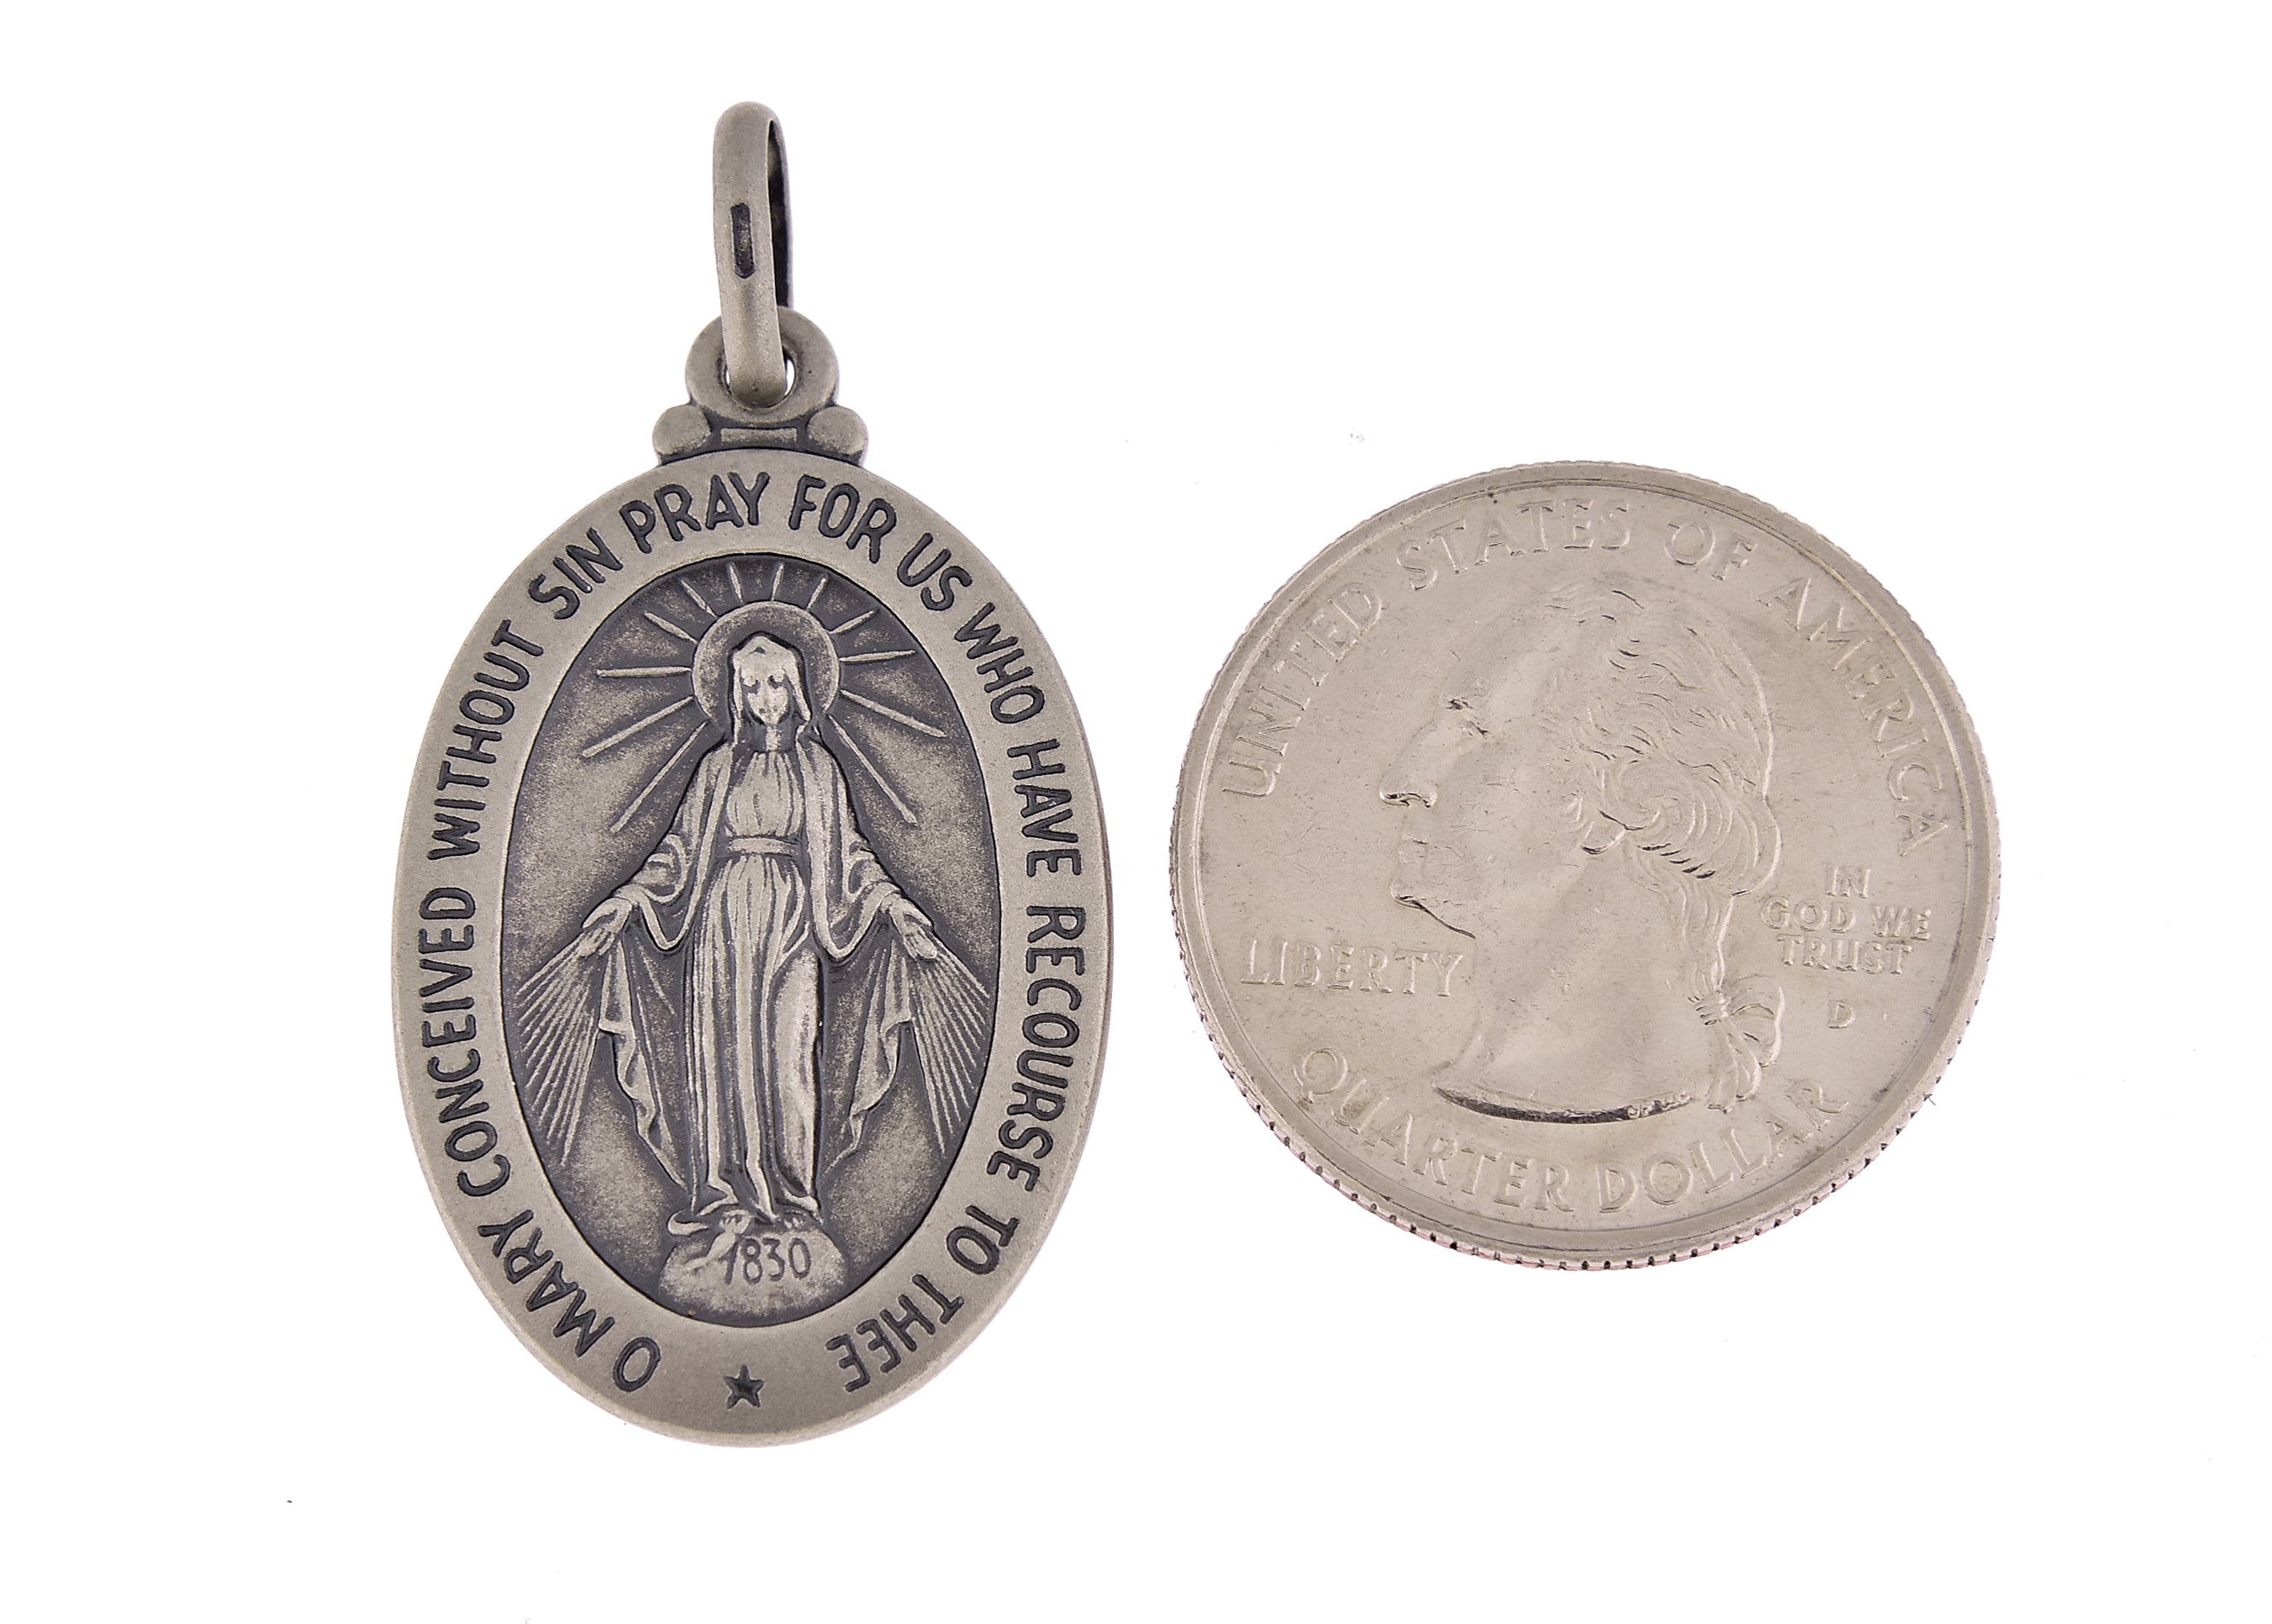 Sterling Silver Blessed Virgin Mary Miraculous Medal Pendant Charm